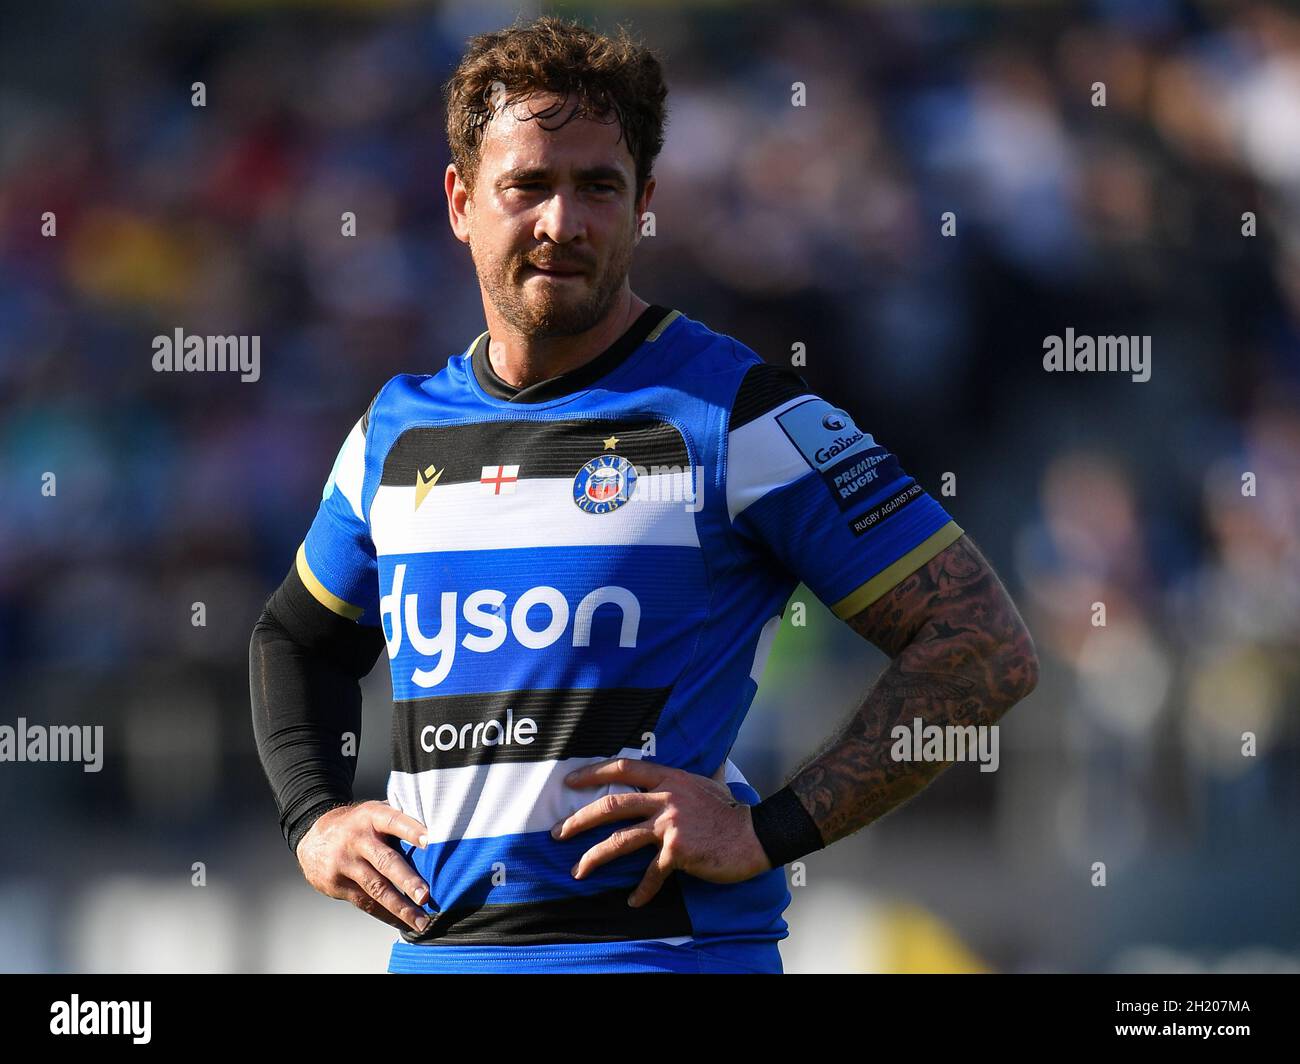 The Recreation Ground, Bath, England, UK. 17th October, 2021. Bath Rugby's Danny Cipriani during the Gallagher English Premiership match between Bath Rugby and Saracens: Credit: Ashley Western/Alamy Live News Stock Photo